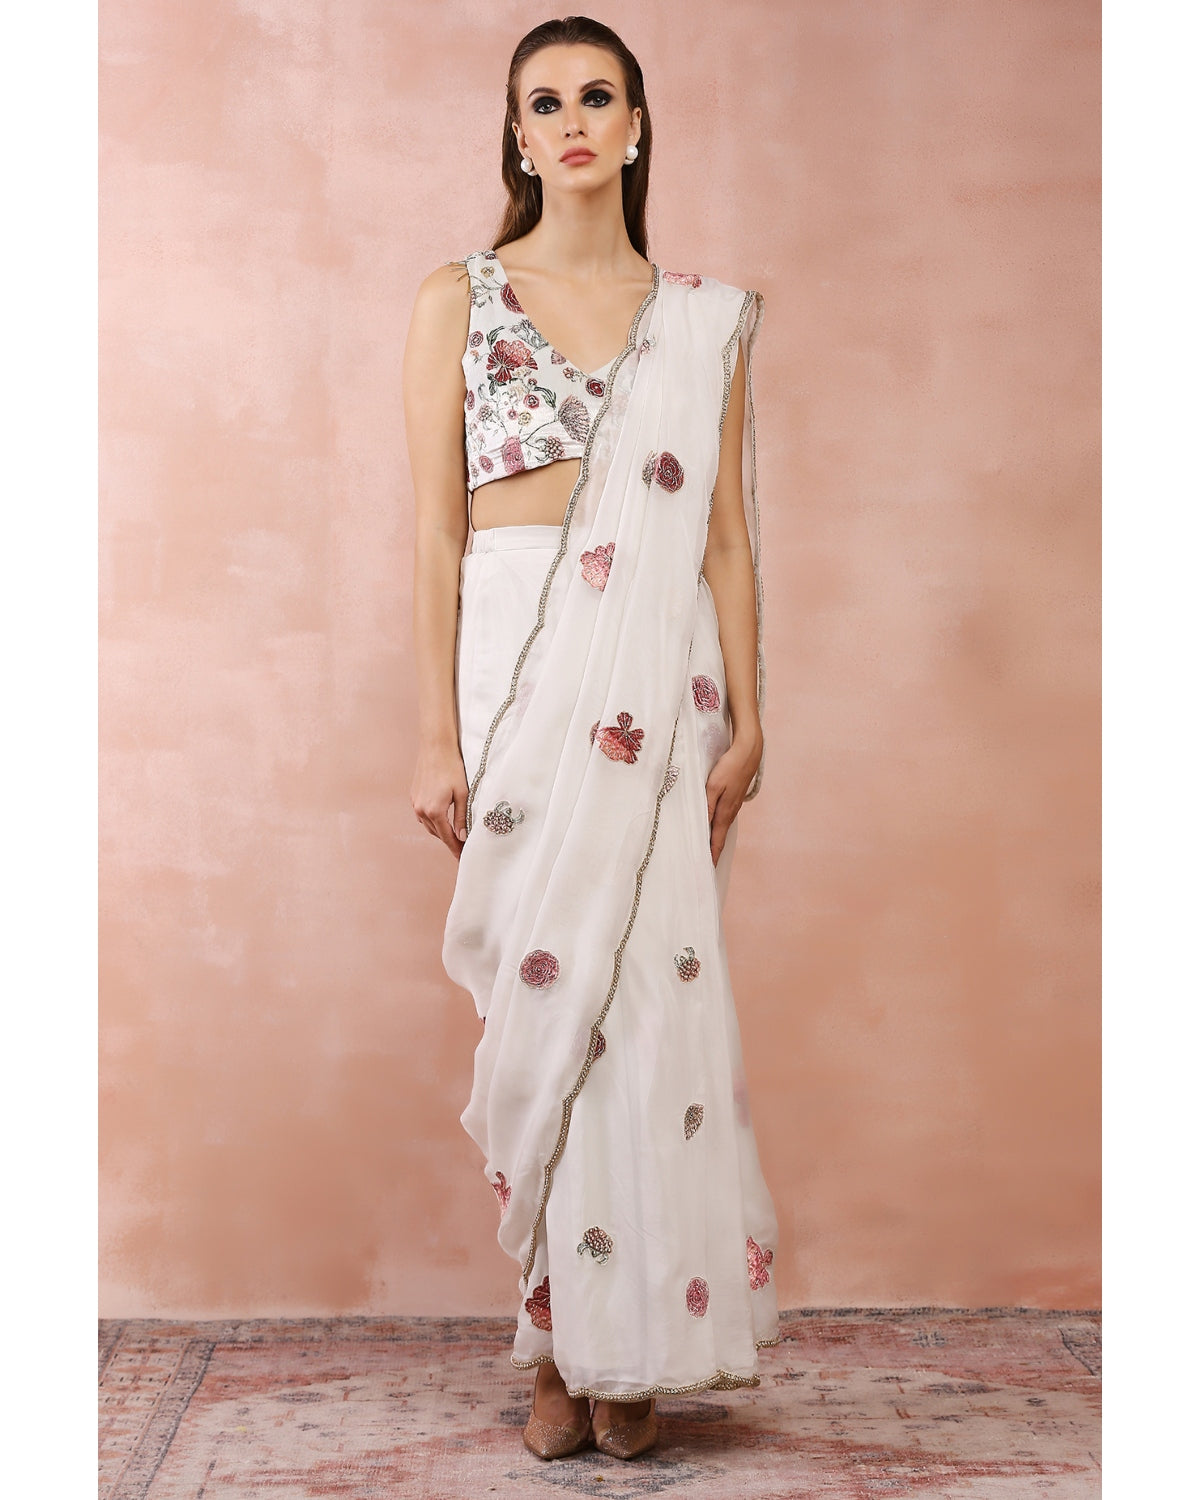 Off White Gulbagh Pre-Stitched Sari by Payal Singhal